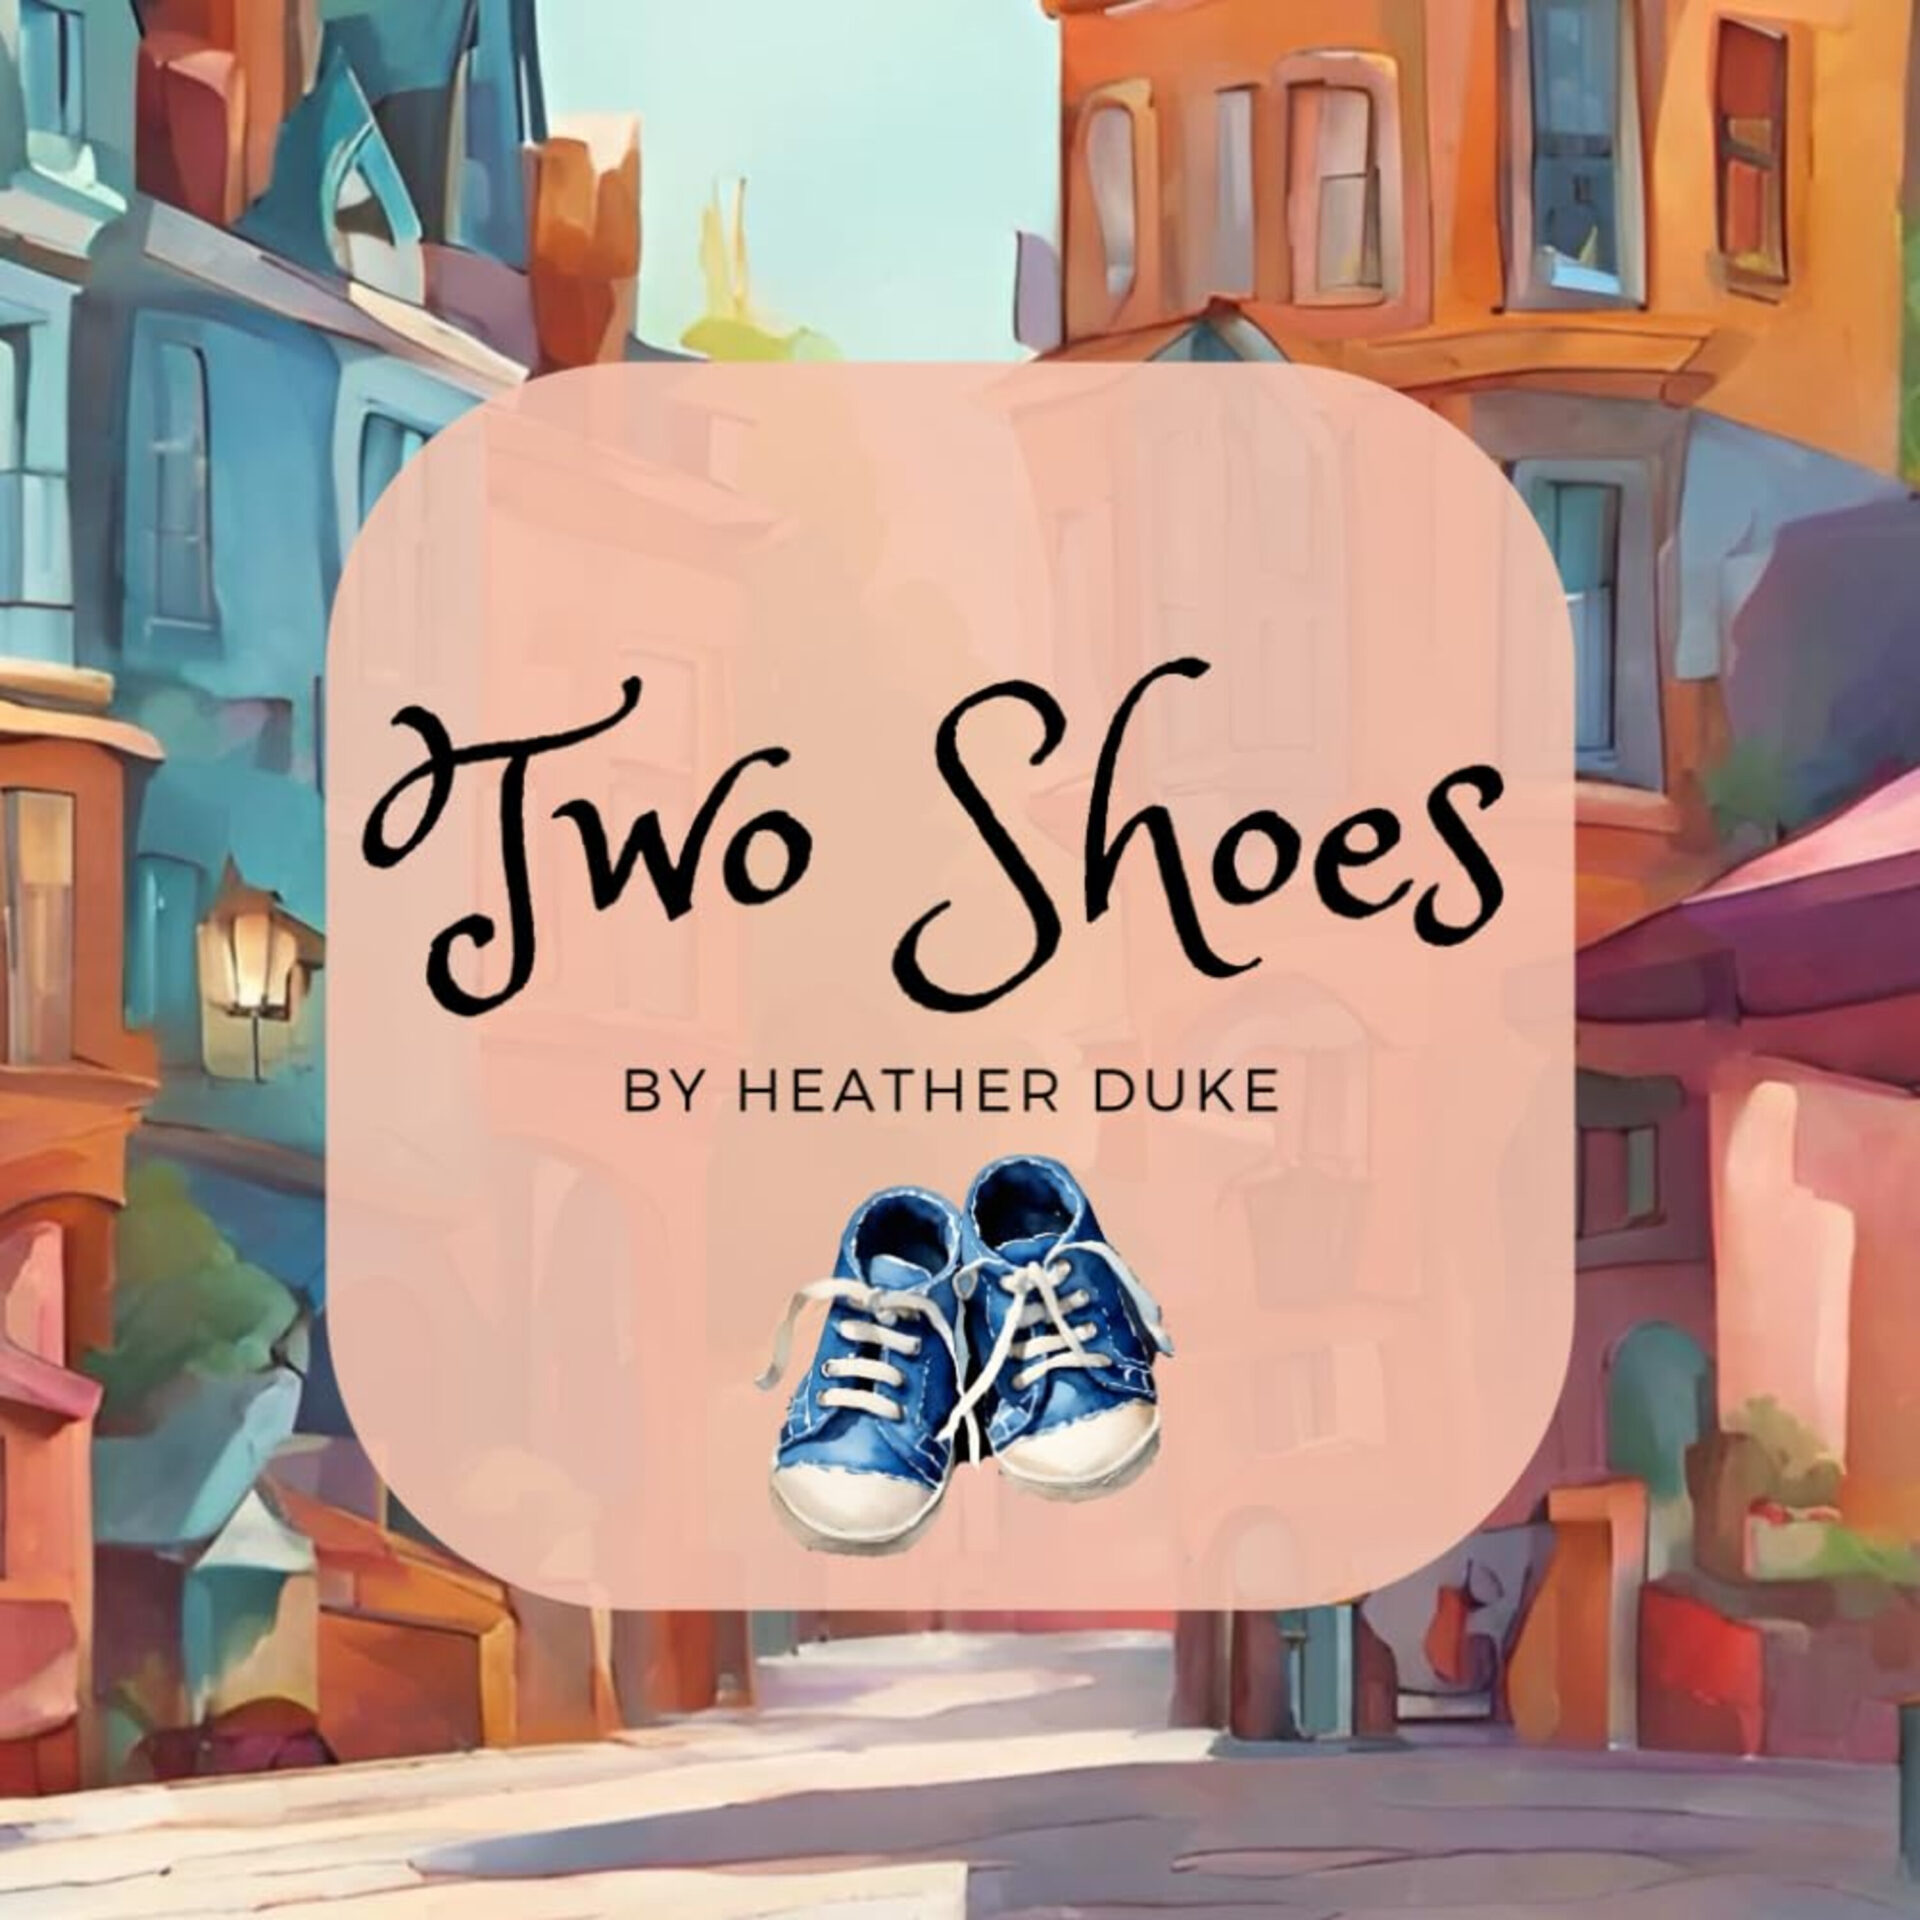 Podcast – Casey Reads A Bedtime Story – Two Shoes By Heather Duke